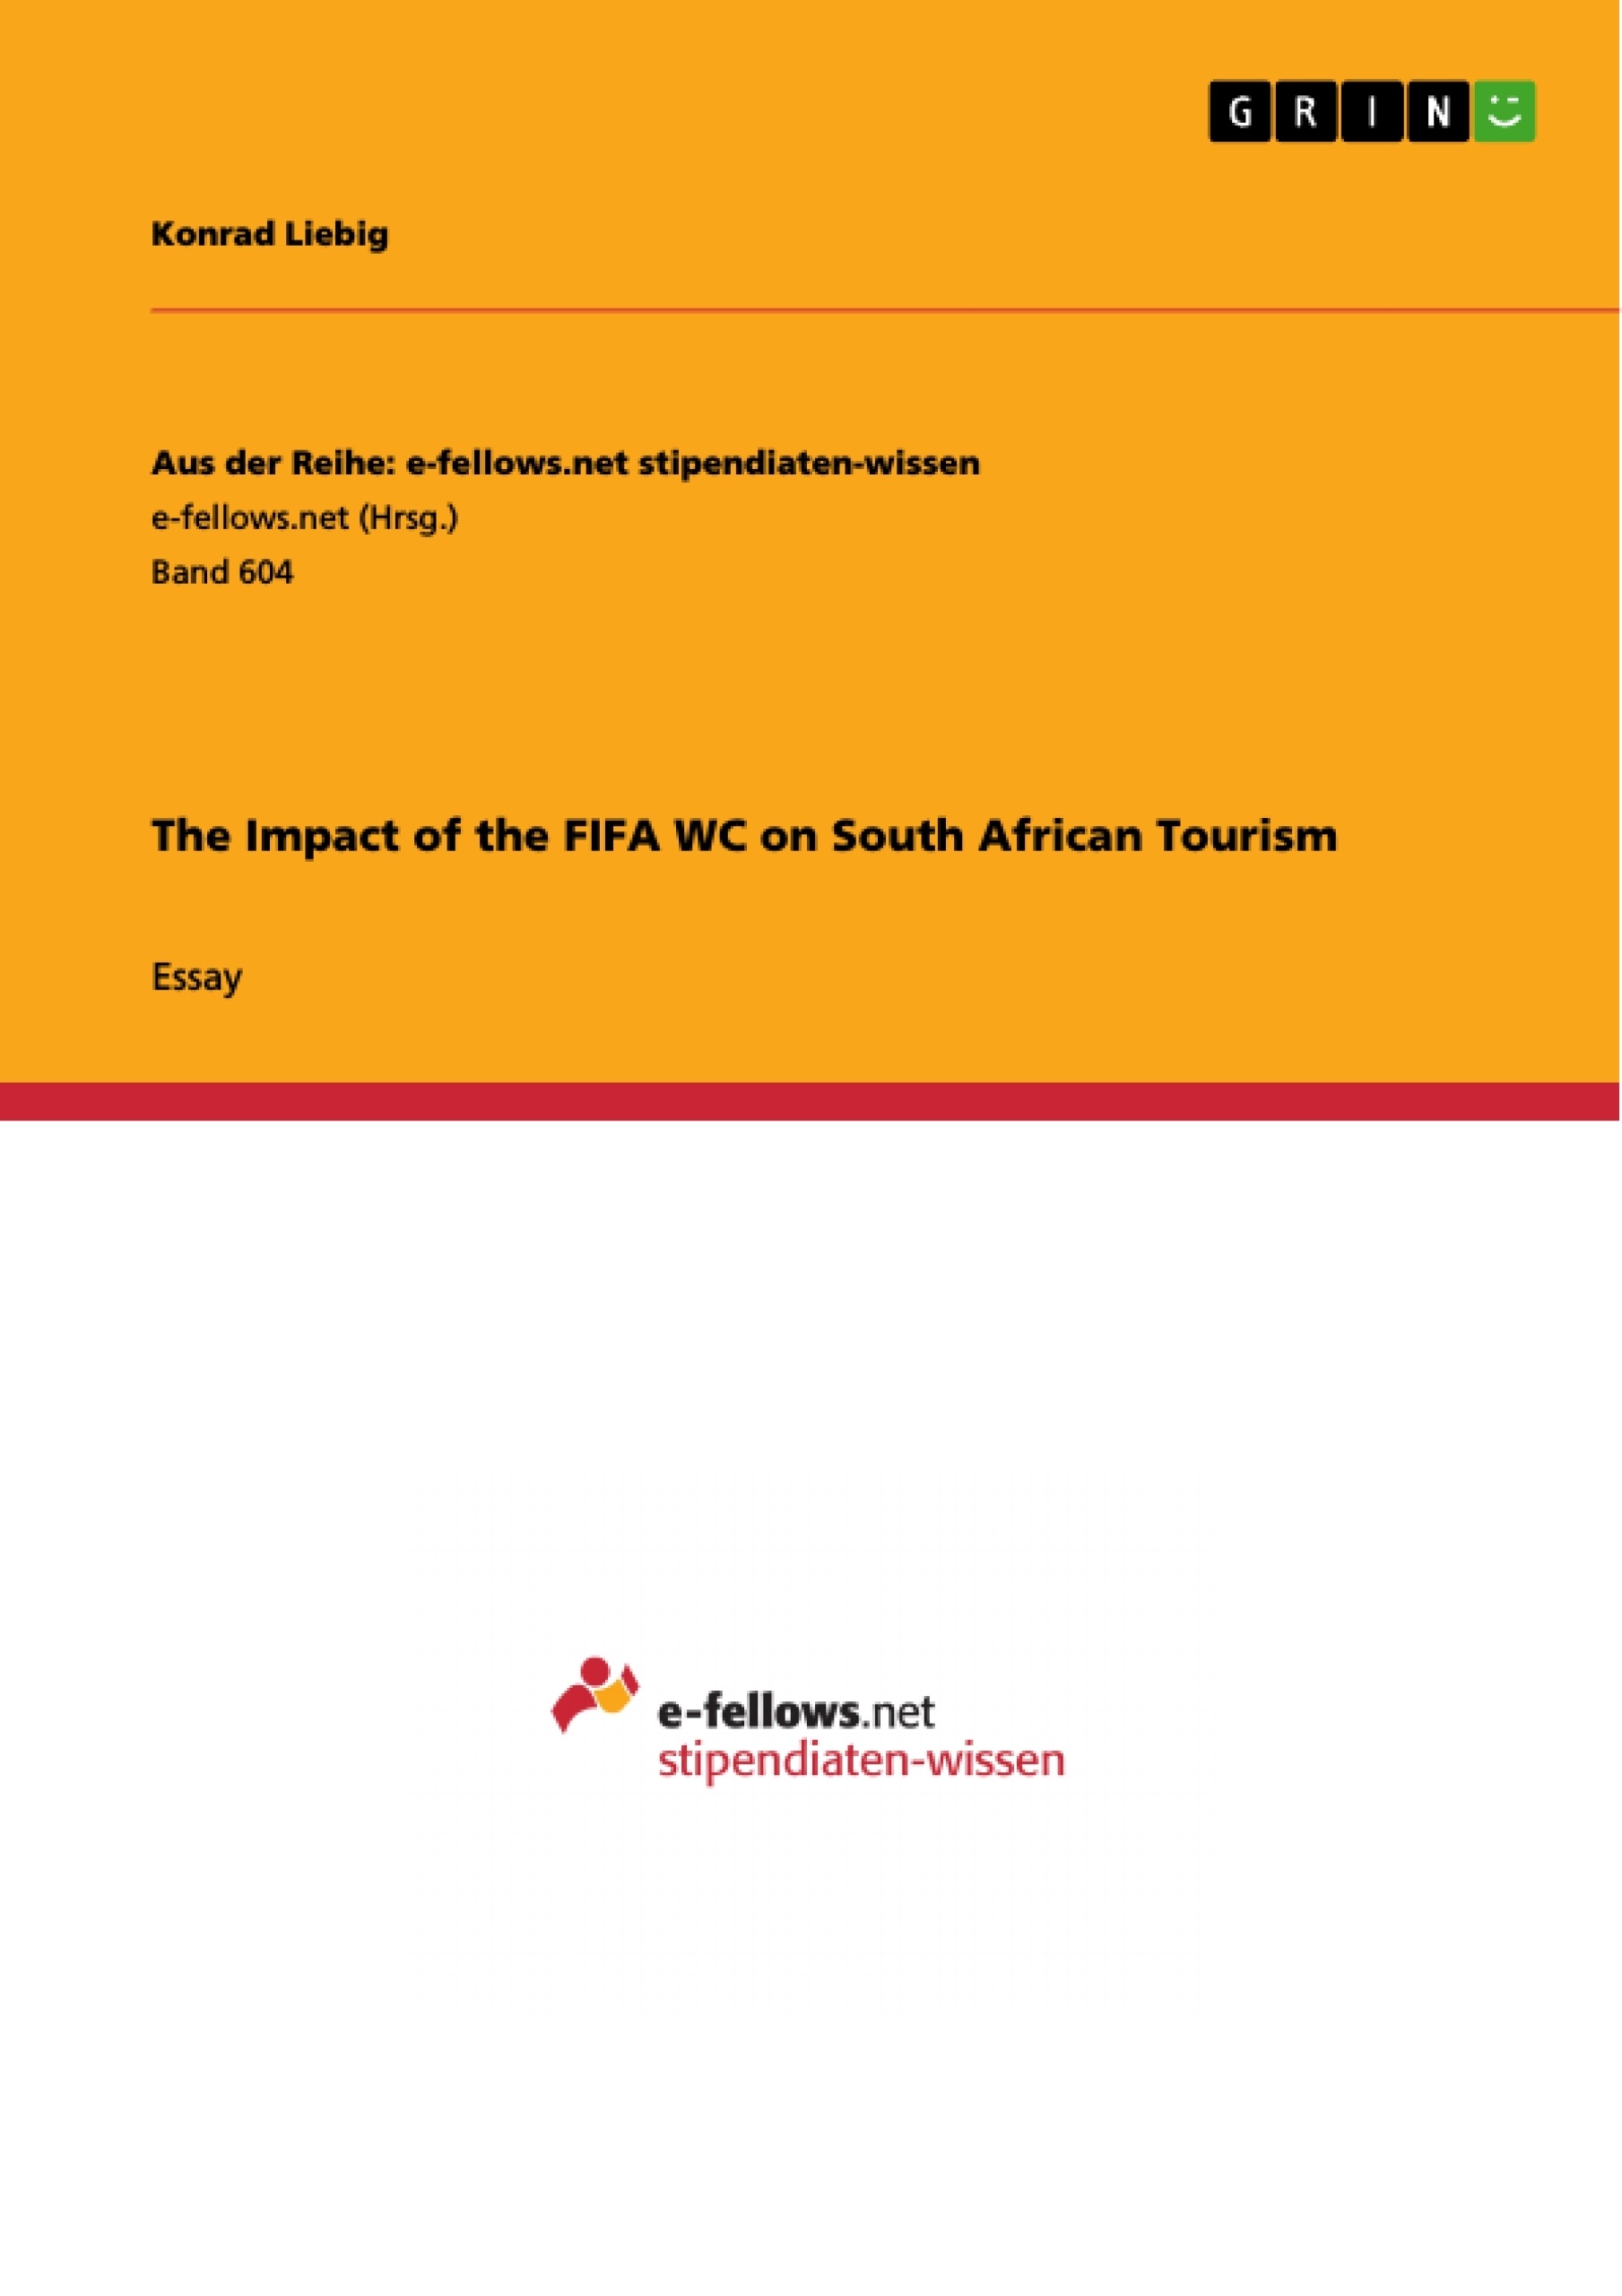 Title: The Impact of the FIFA WC on South African Tourism